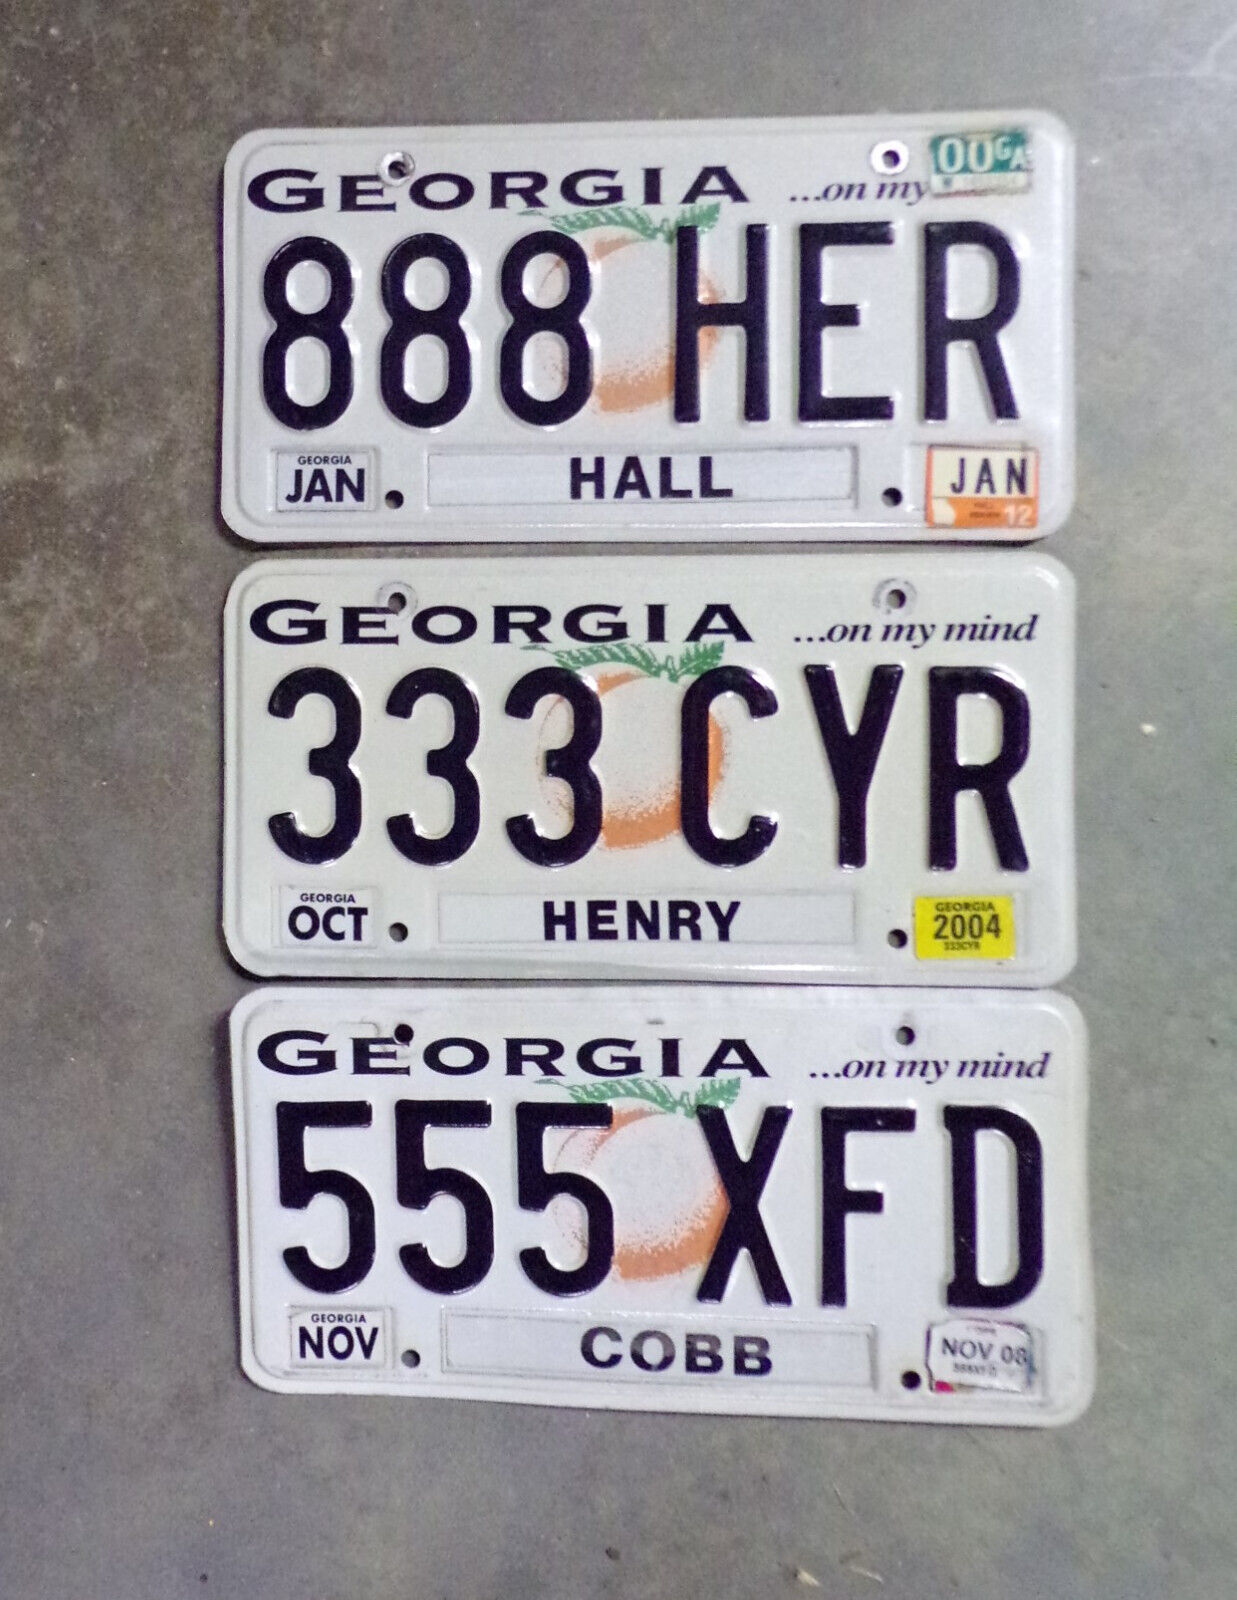 Three expired Georgia License Plates with Triple Numbers...333 555 888